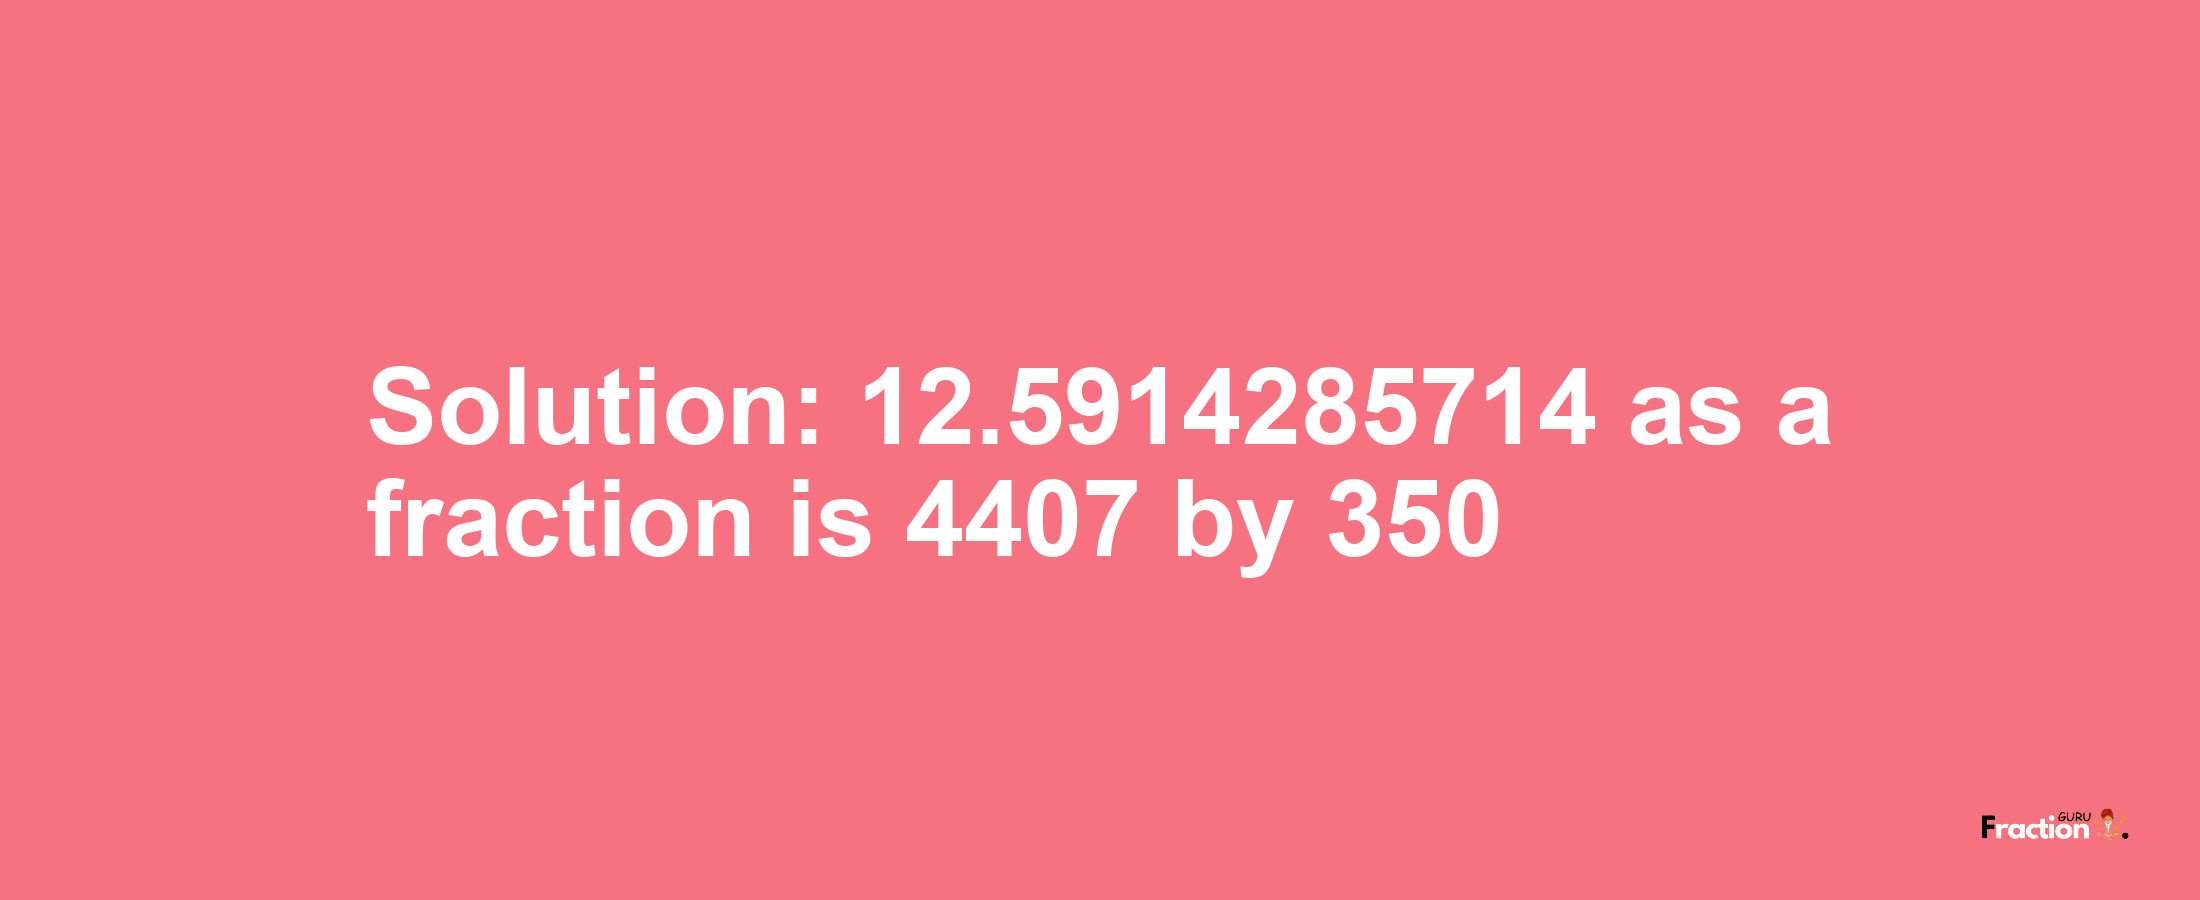 Solution:12.5914285714 as a fraction is 4407/350